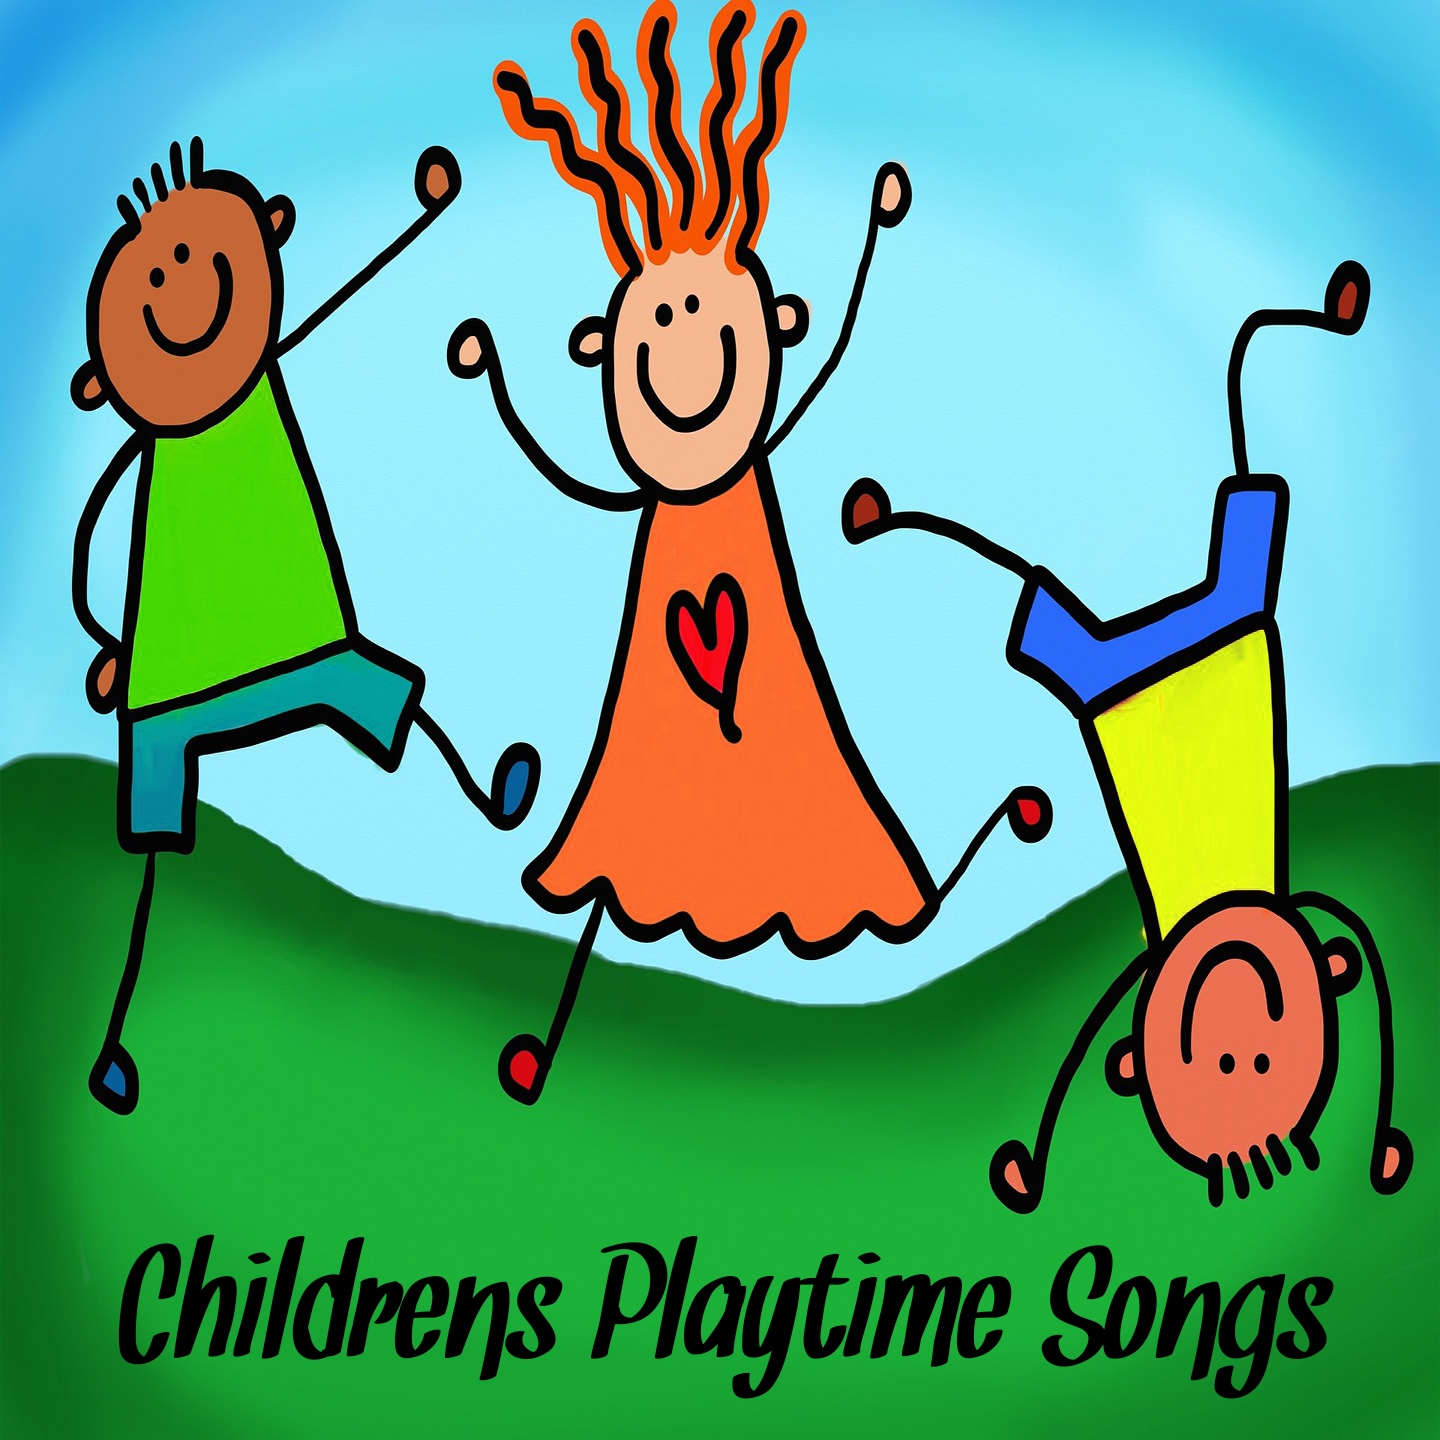 Childrens Playtime Songs